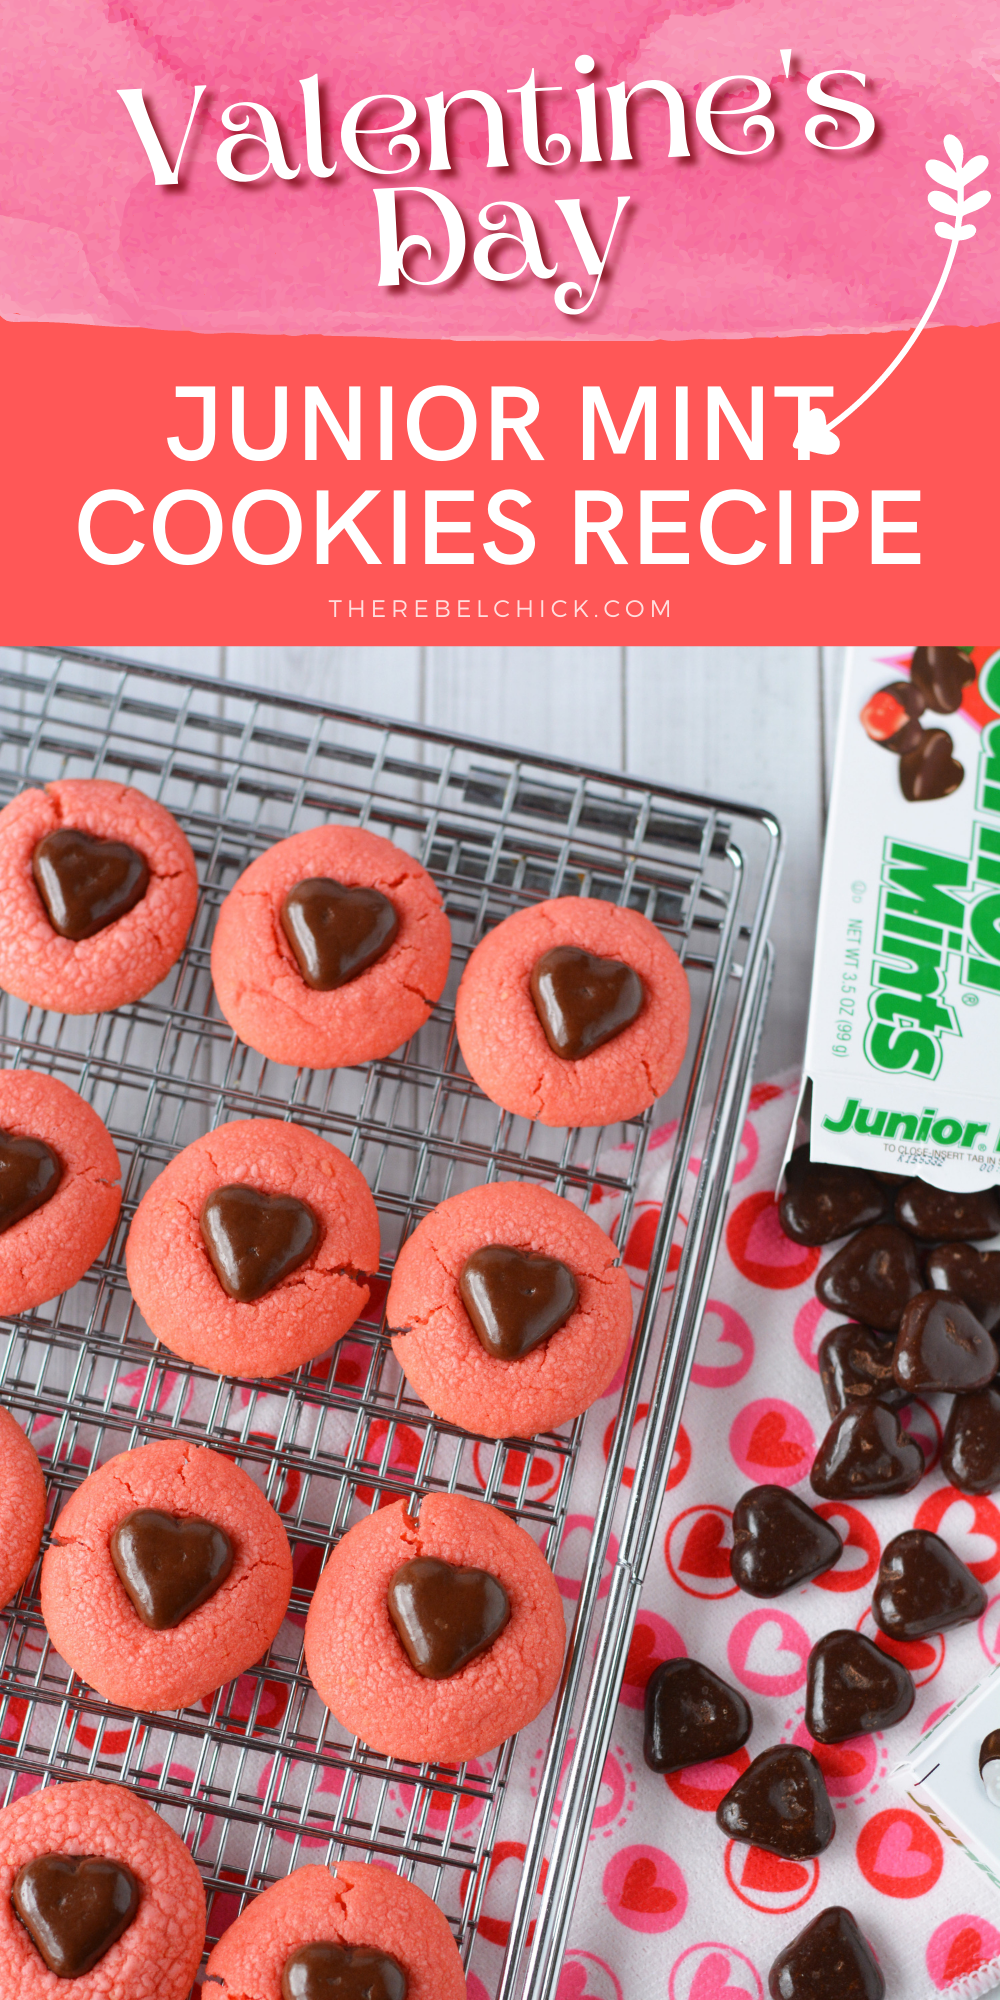 Junior Mint Cookies Recipe for Valentine's Day